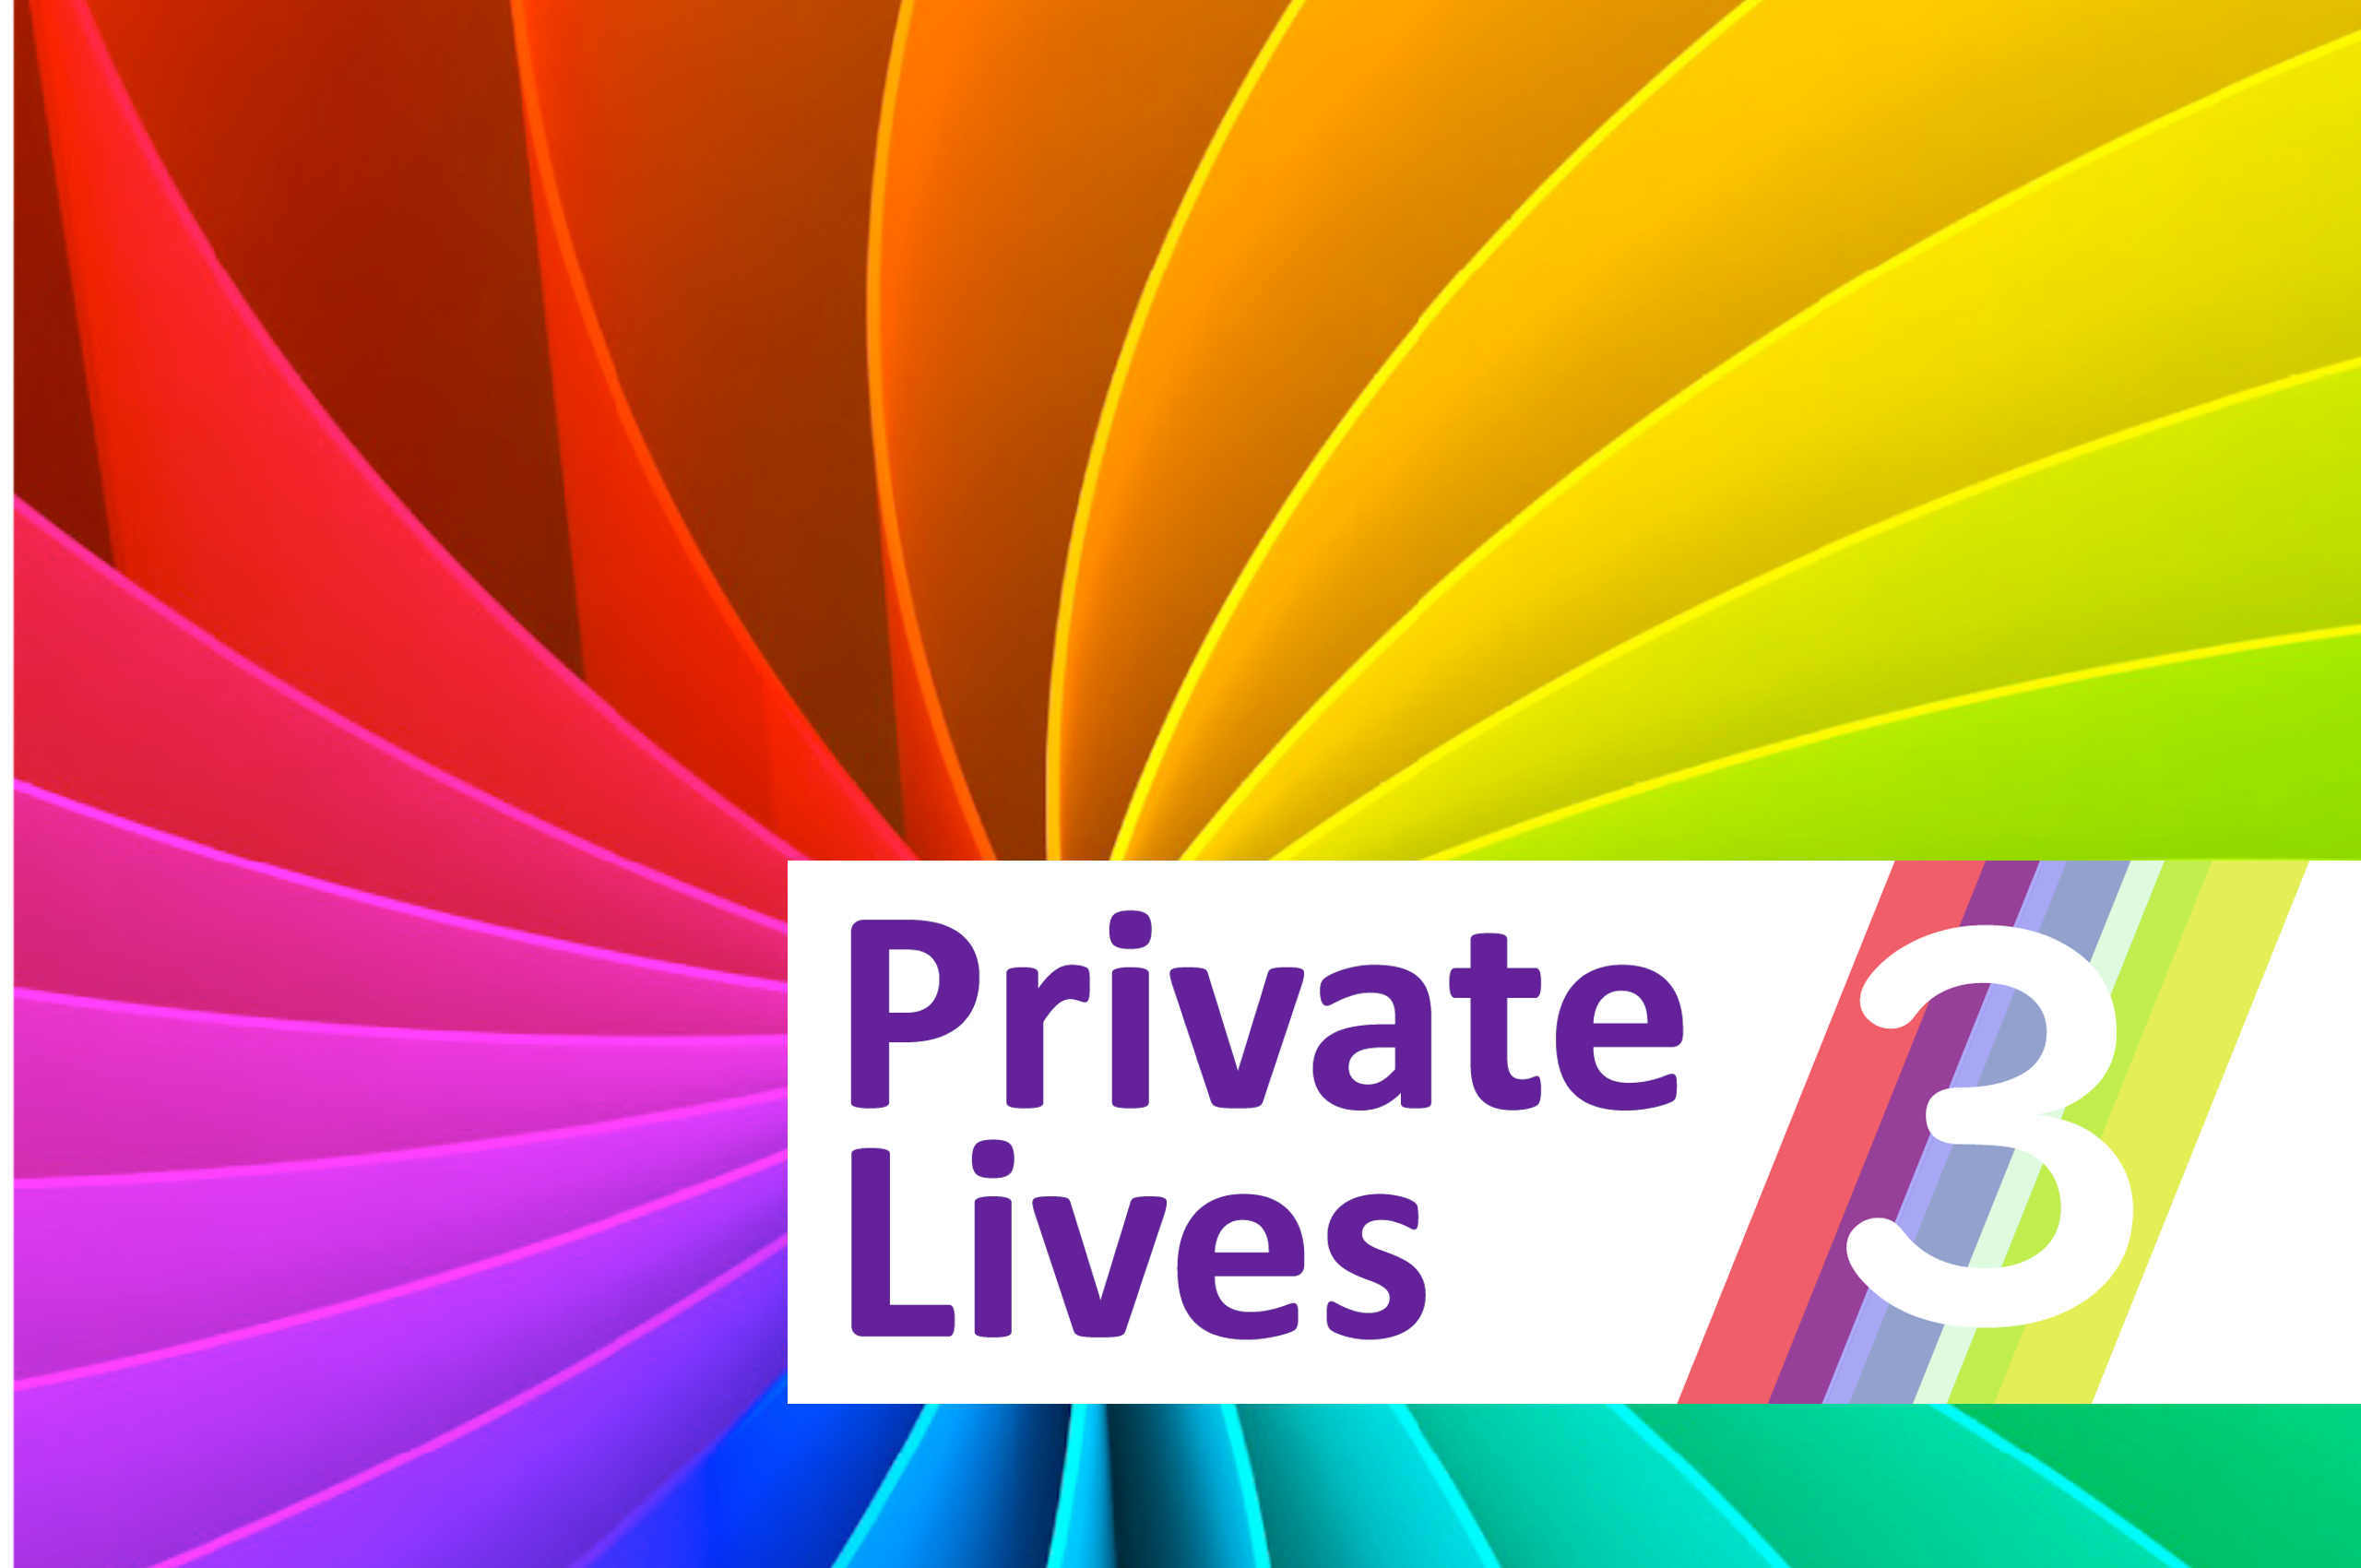 Private Lives 3 logo on design of fanned rainbow cards